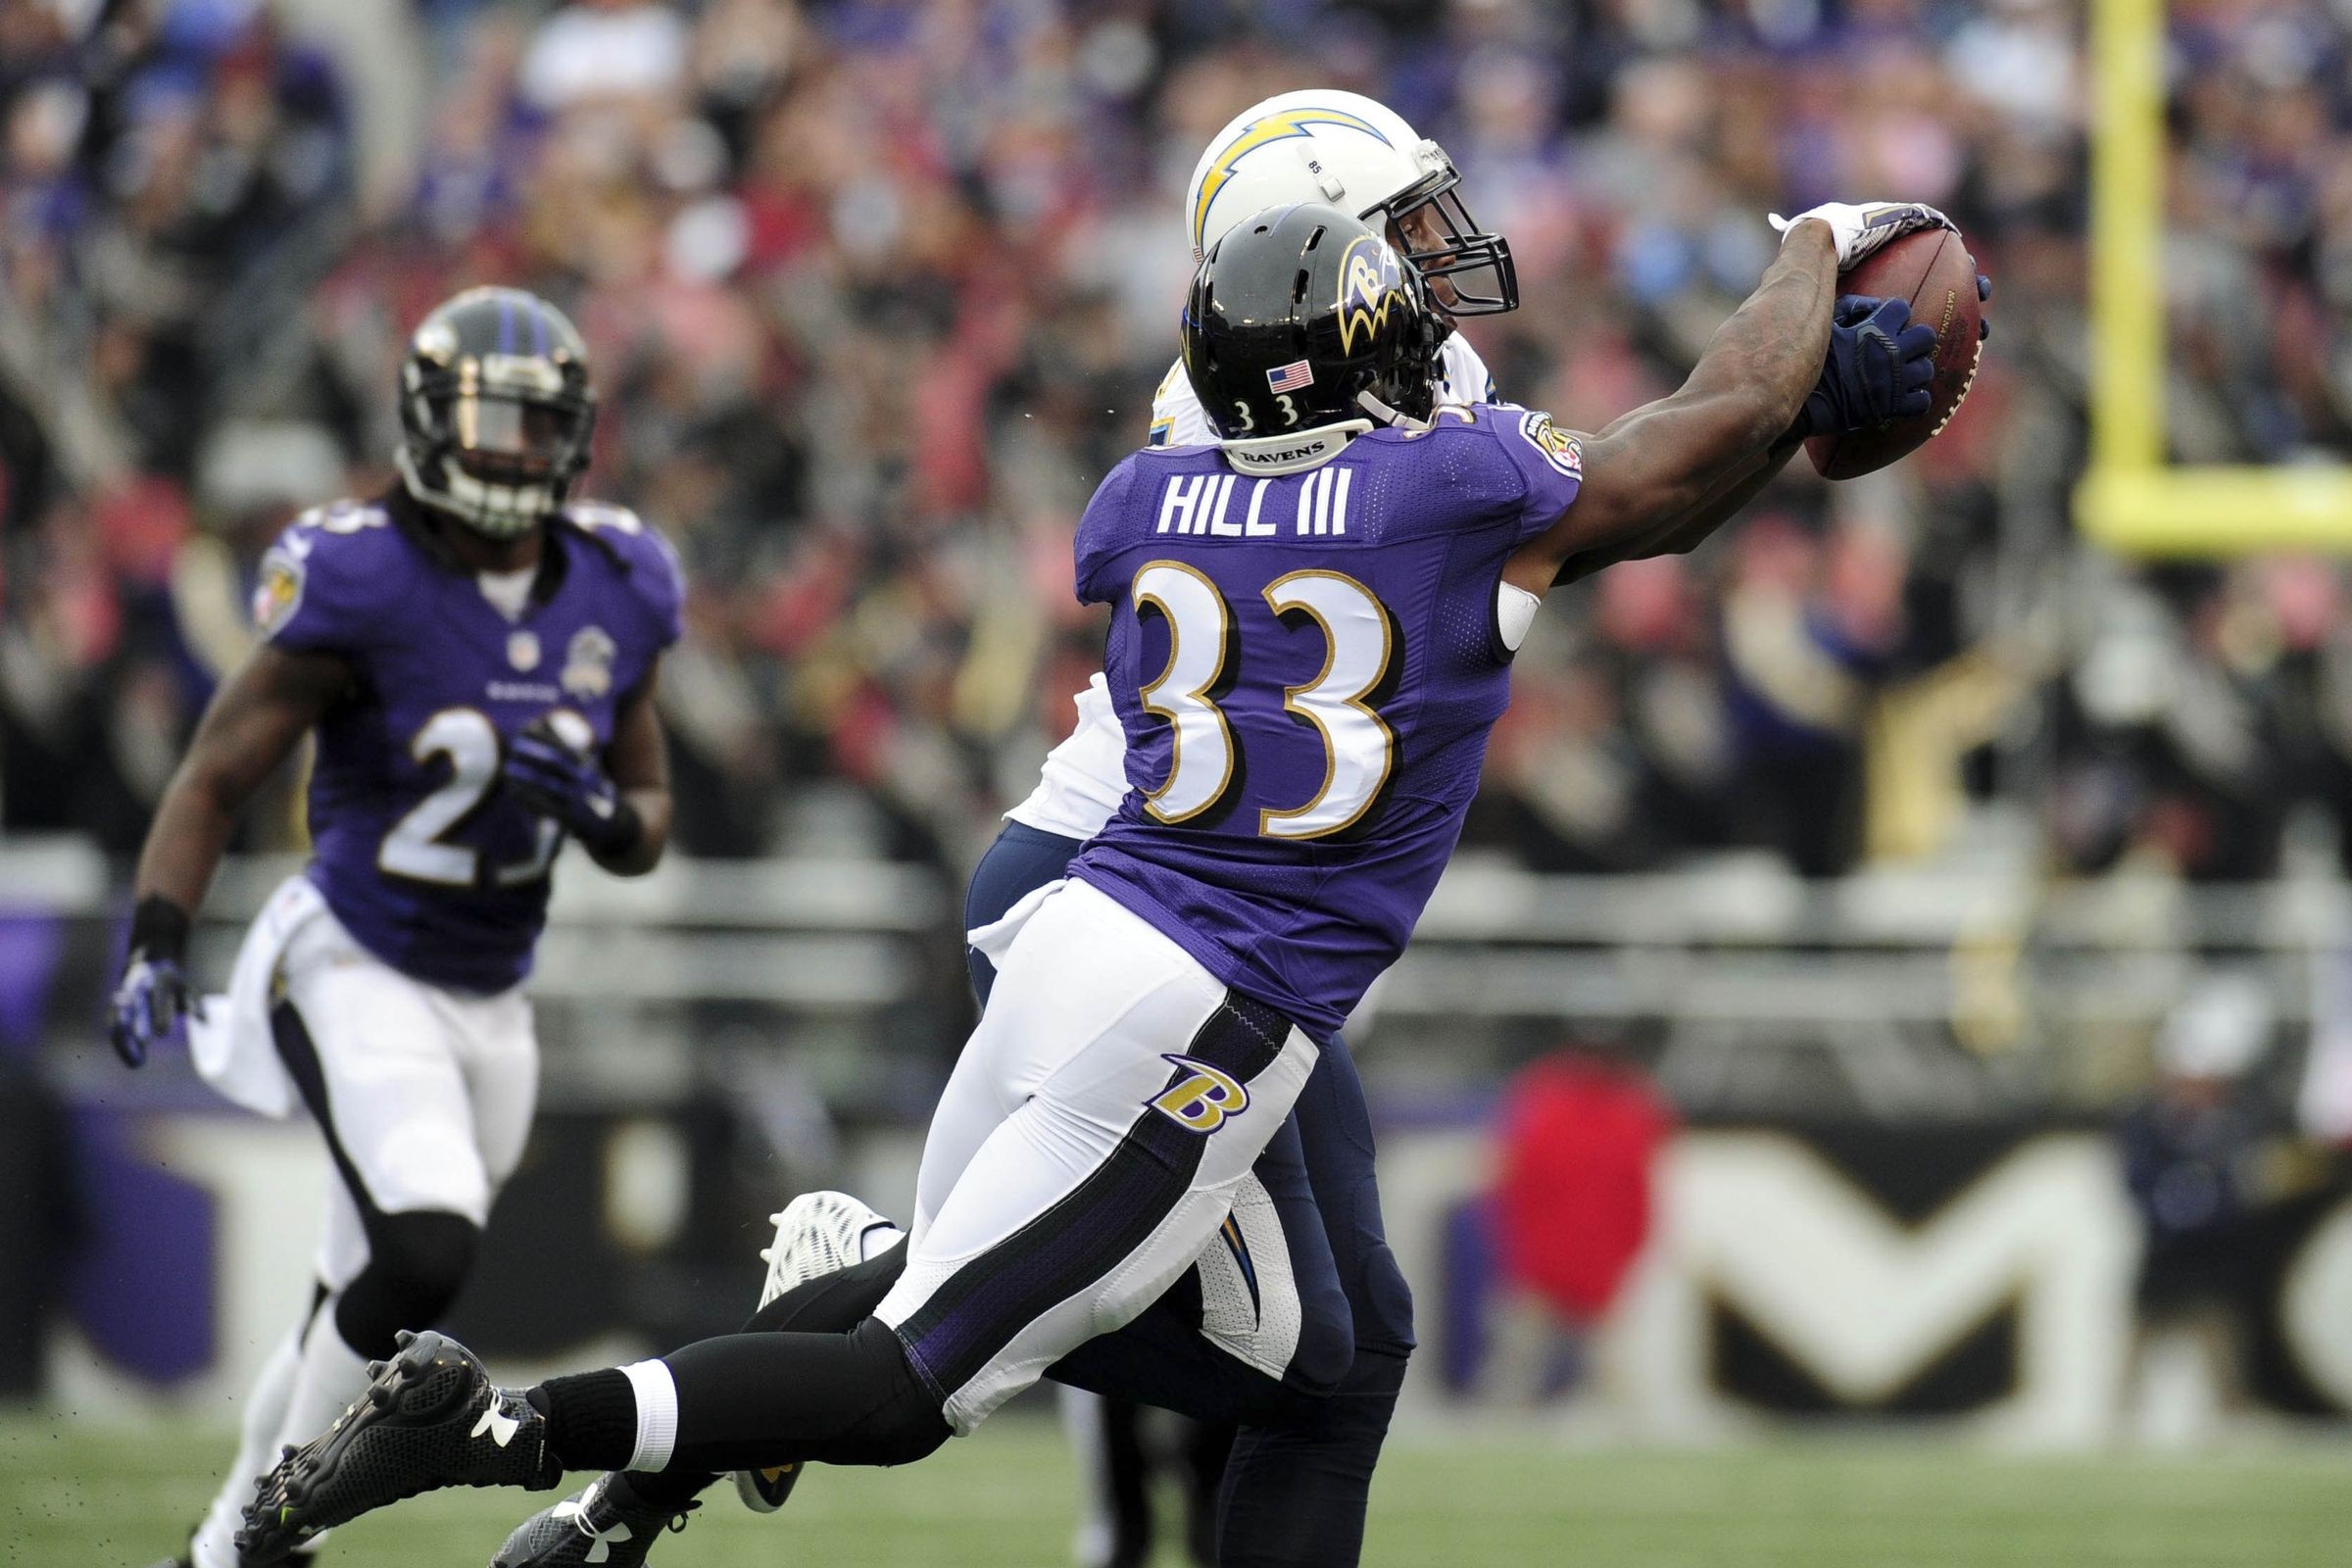 Ravens safety Will Hill with another big hit